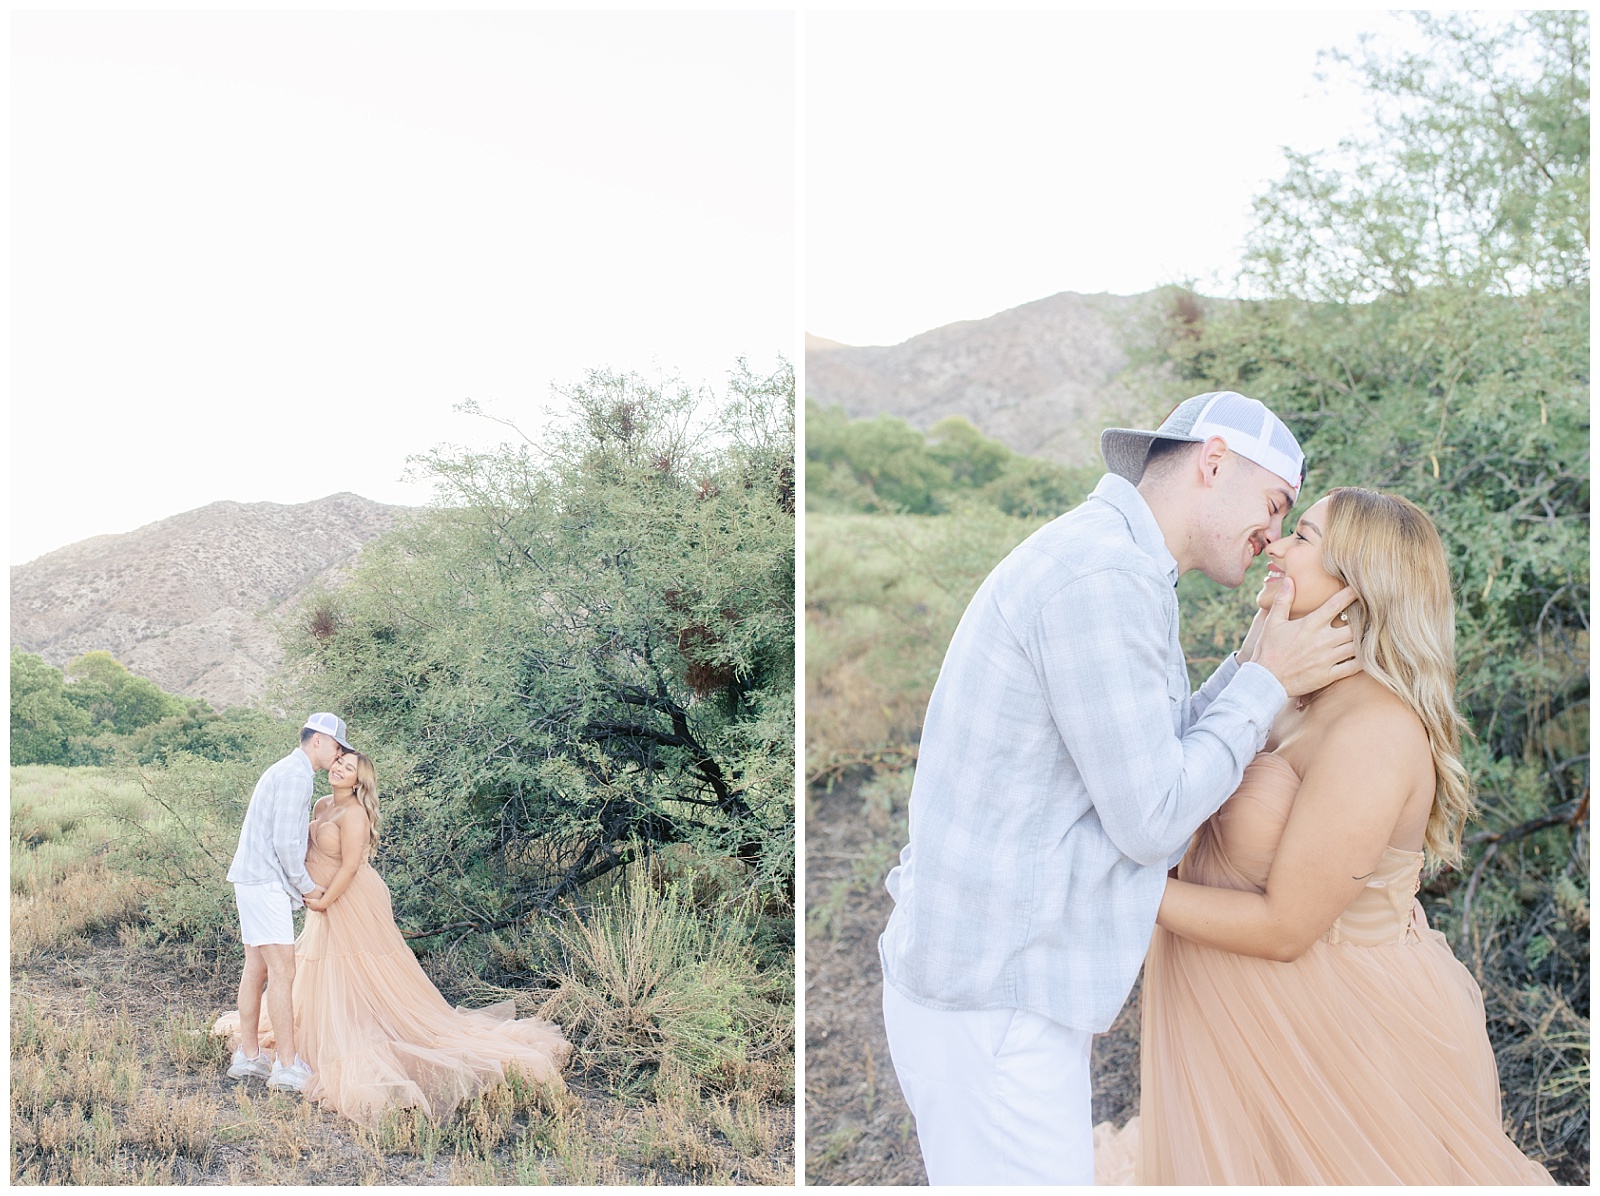 Luxury Maternity session at big morongo canyon preserve joshua tree California by bright and colorful photographer elizabeth kane light and airy photography 